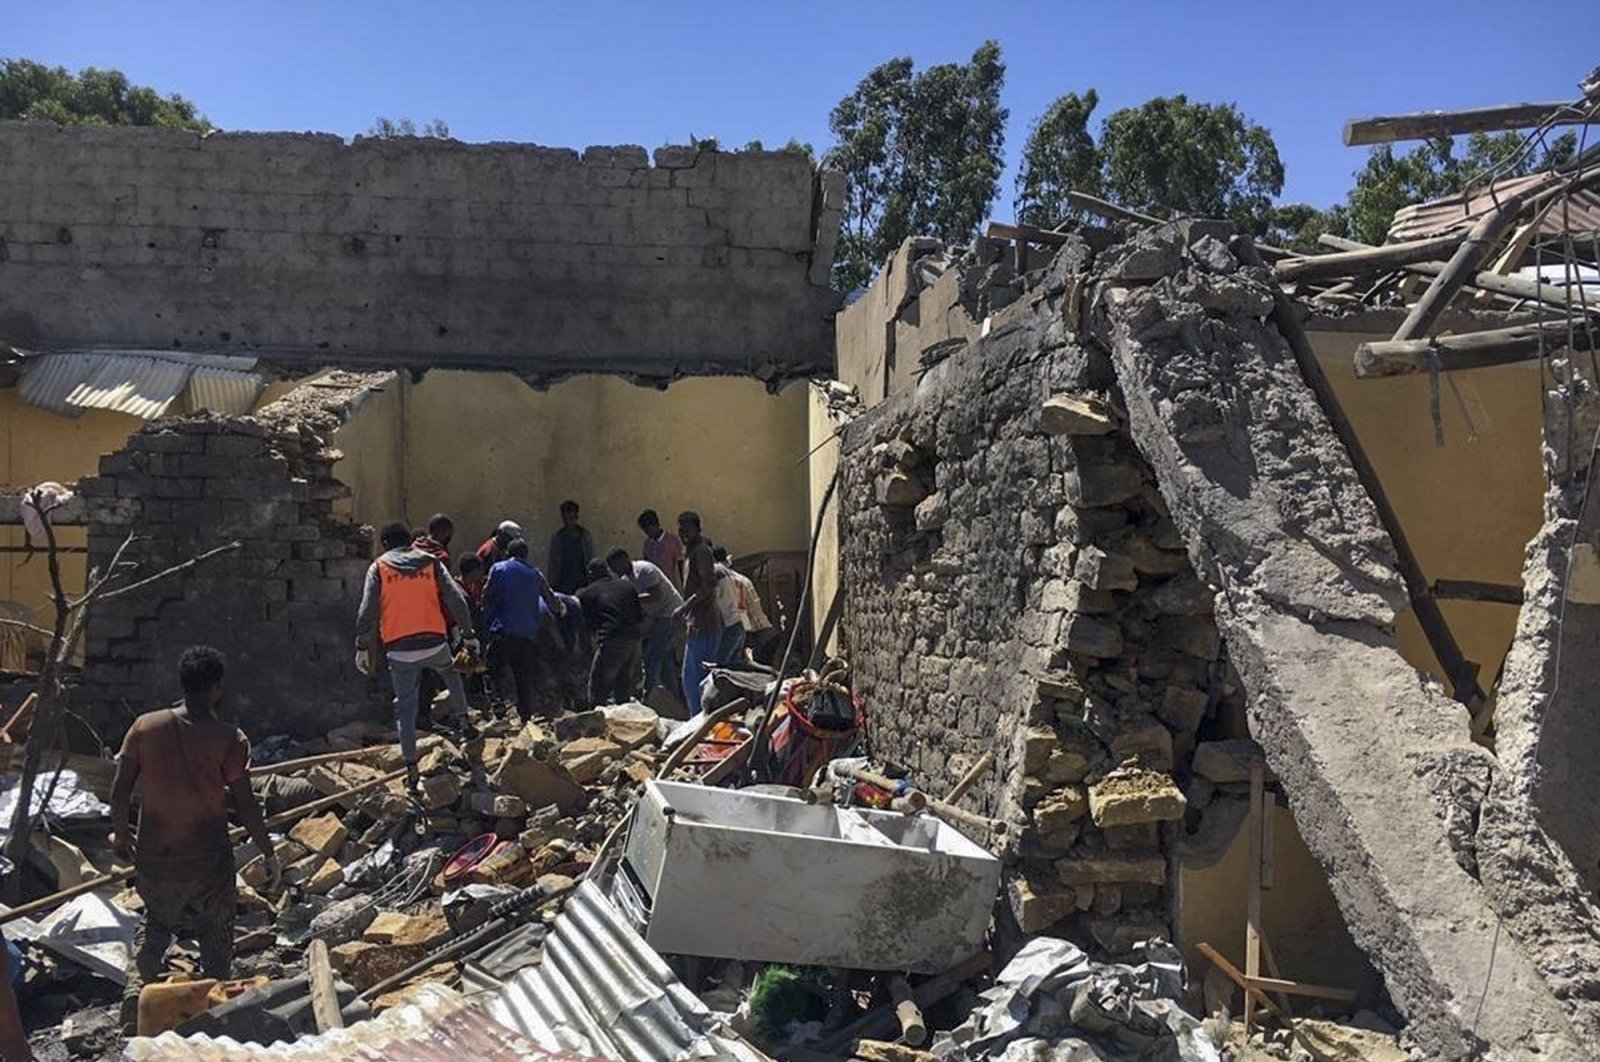 Residents sift through rubble from a destroyed building at the scene of an airstrike in Mekele, in the Tigray region of northern Ethiopia, Oct. 28, 2021. (AP Photo)